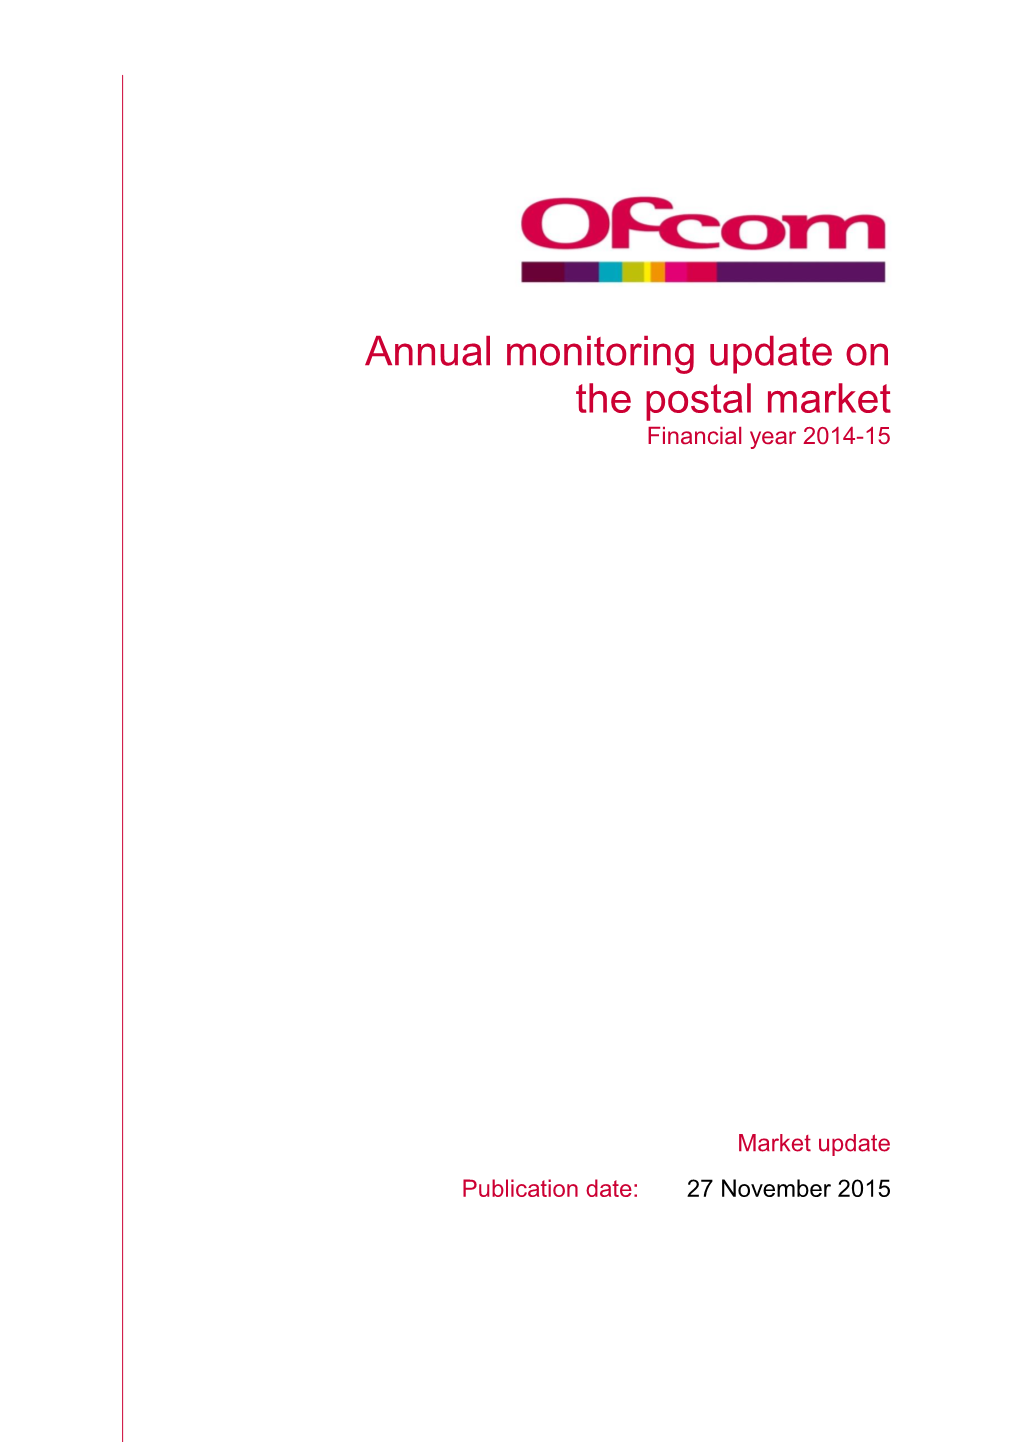 Annual Monitoring Update on the Postal Market Financial Year 2014-15